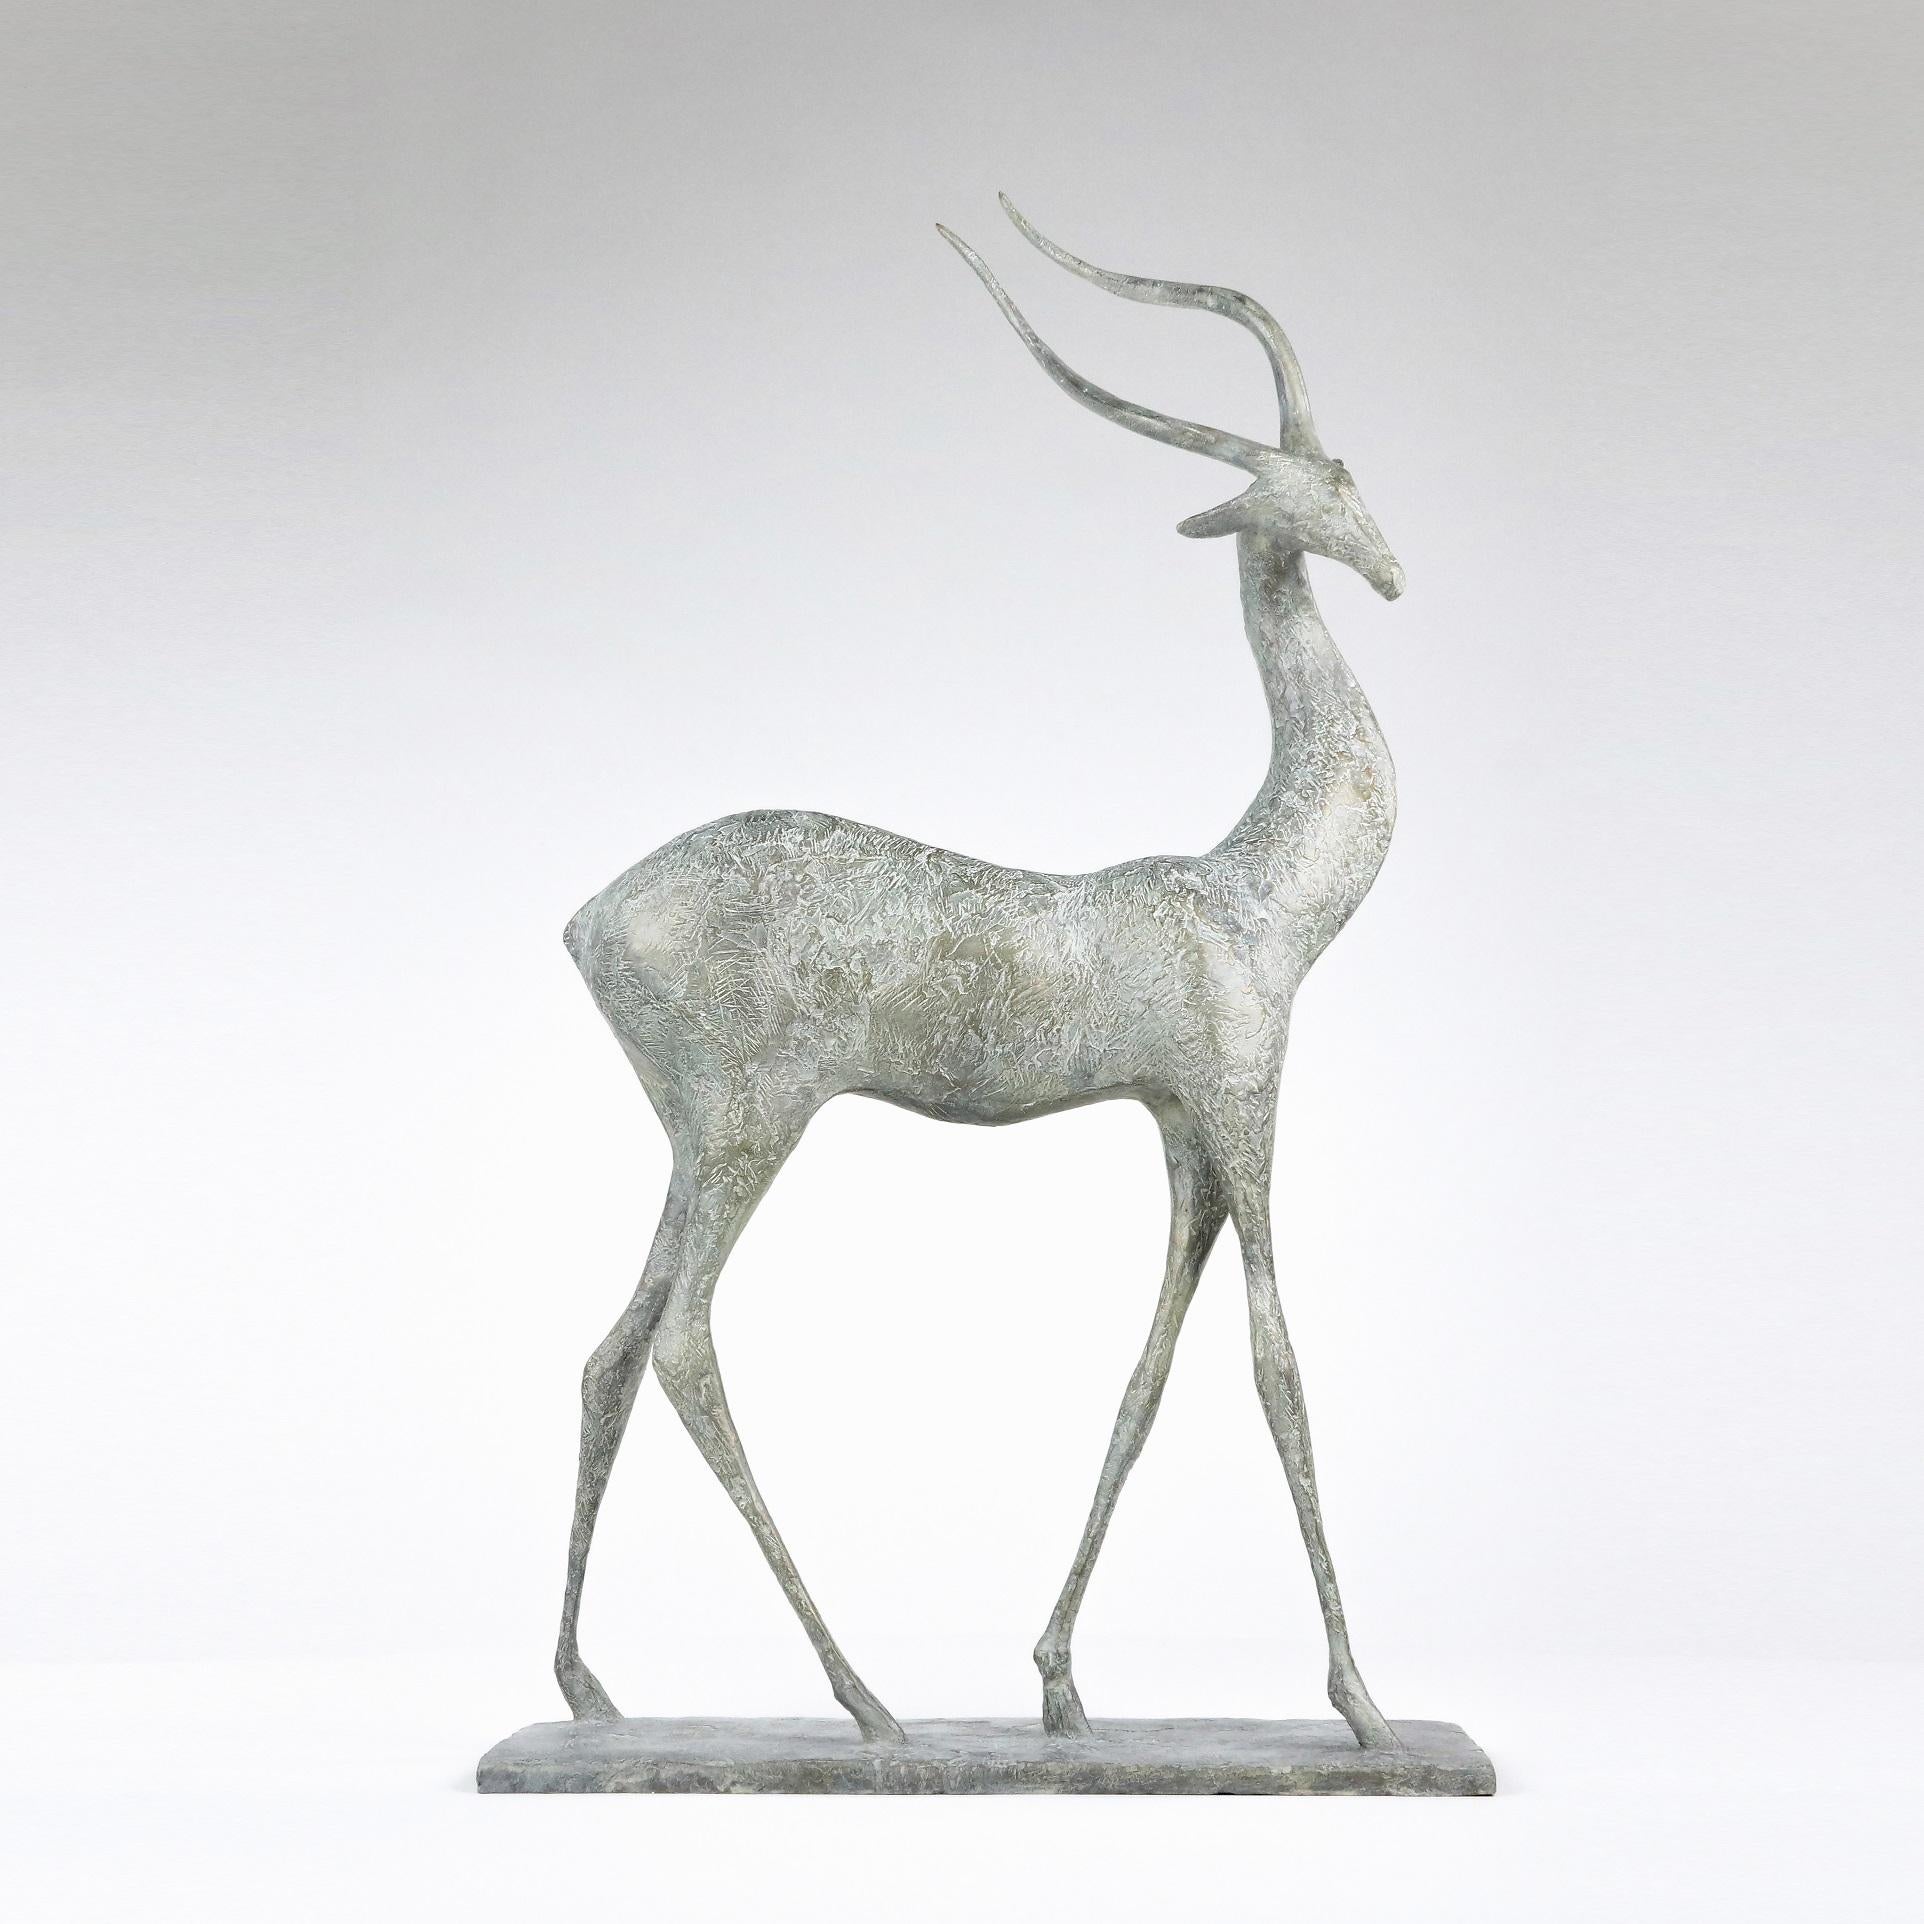 Bronze sculpture by French contemporary artist Pierre Yermia. 70 cm × 40 cm × 15 cm, signed and numbered, limited edition of 8 + 4 artist’s proofs.

This bronze sculpture represents a gazelle, a slim and elegant animal which is sometimes associated